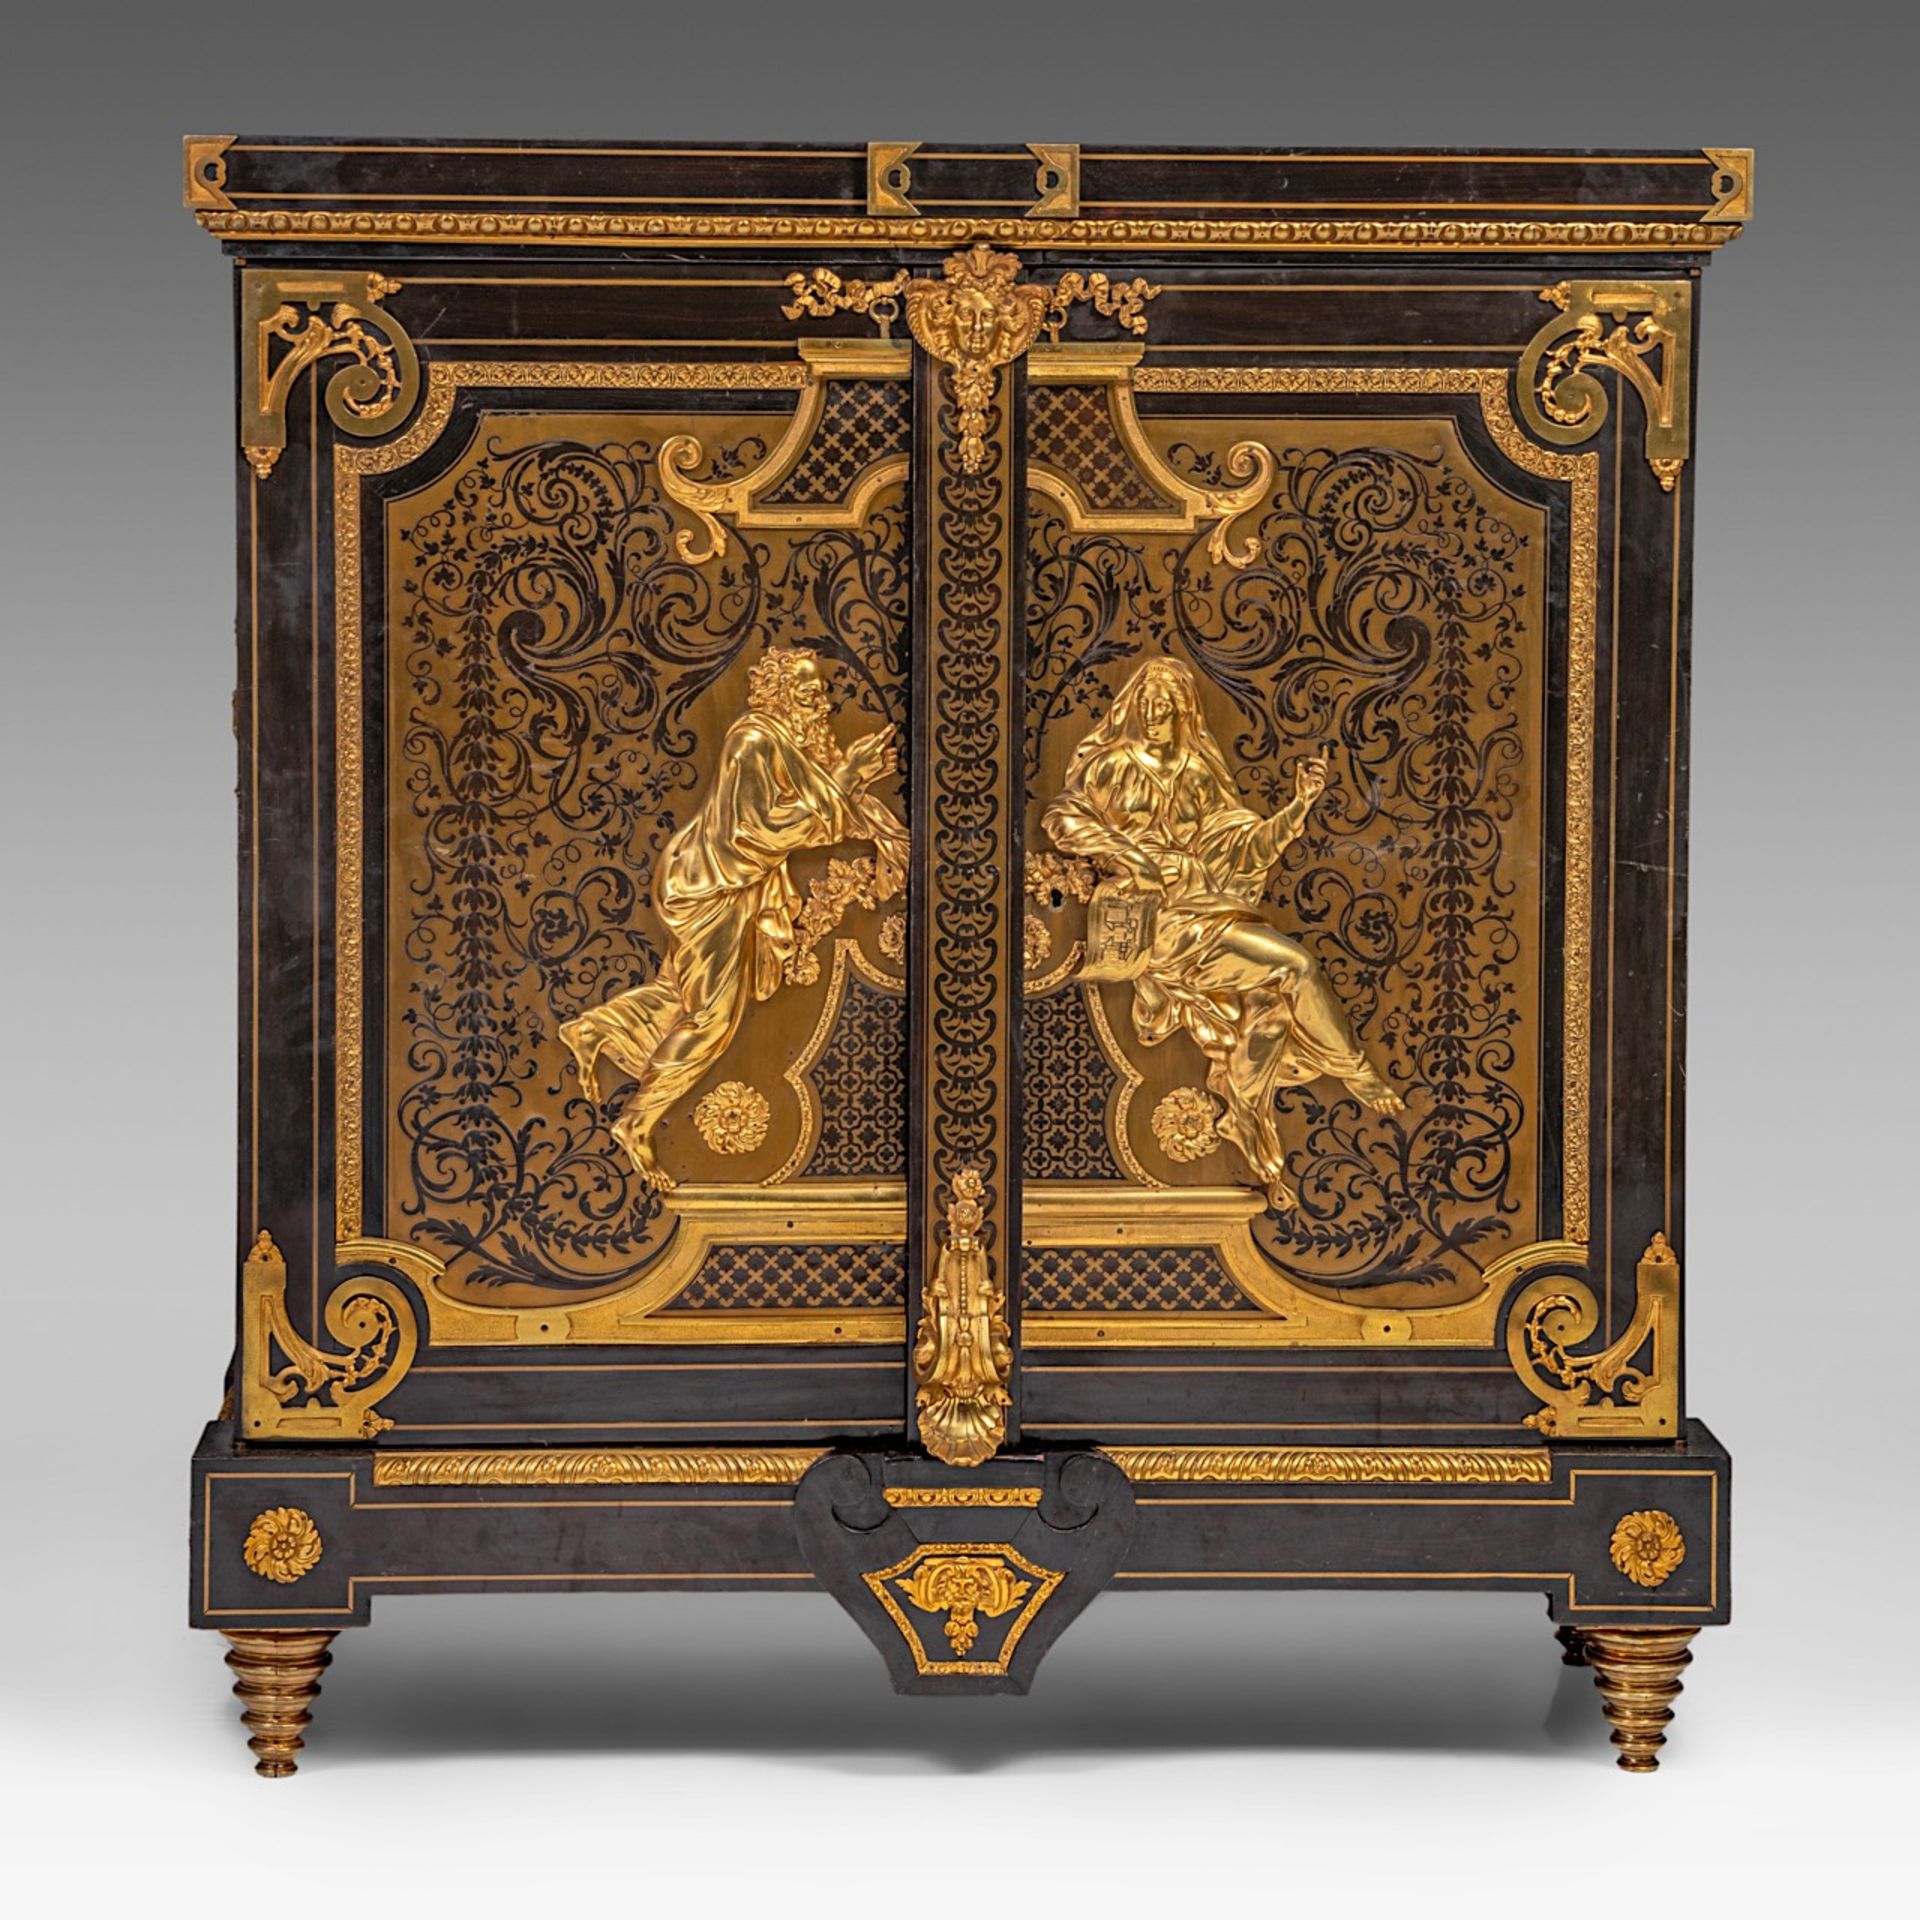 An exceptional Regence style Boulle work cabinet with gilt bronze mounts, signed Mathieu Befort The - Image 2 of 6